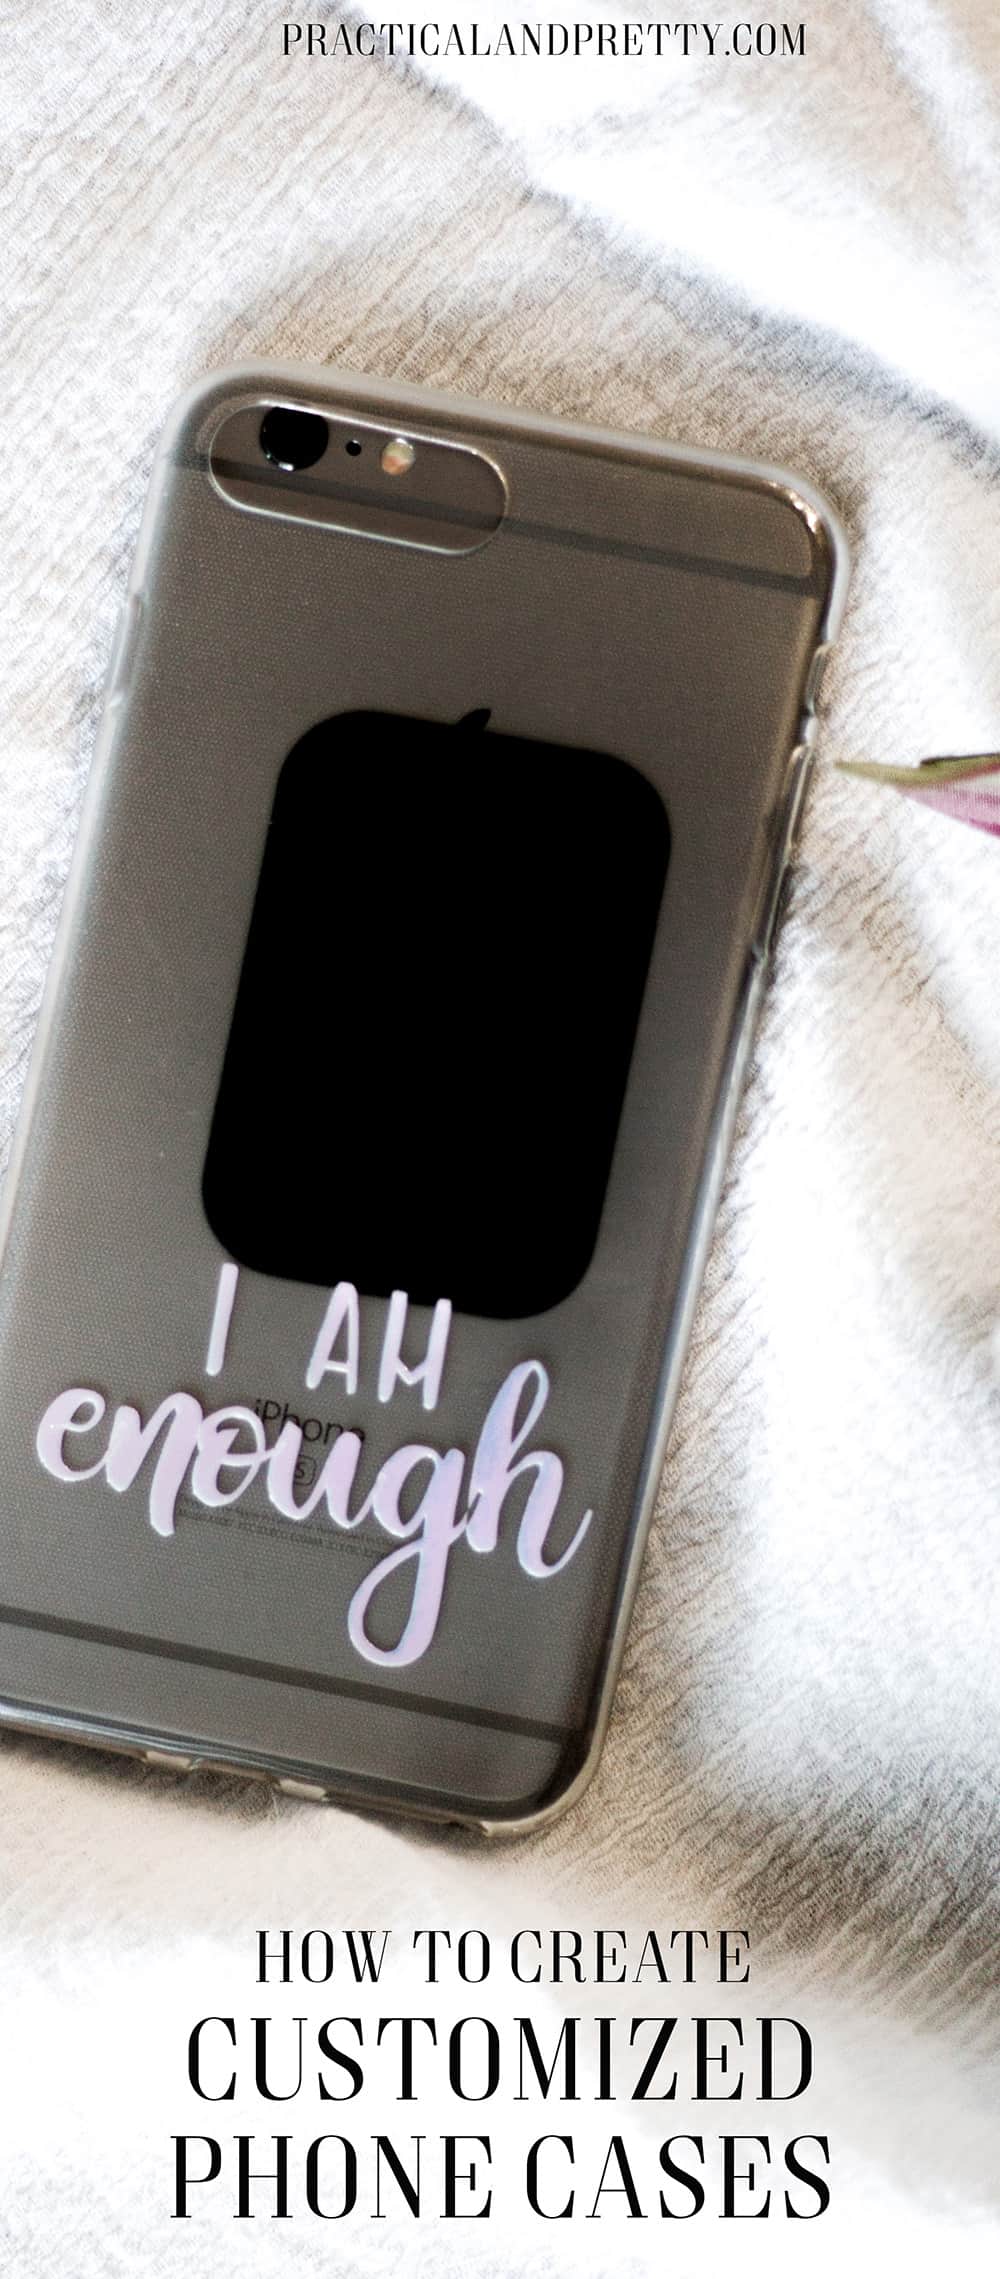 It is really so simple to create your own custom phone cases. Let me show you how!